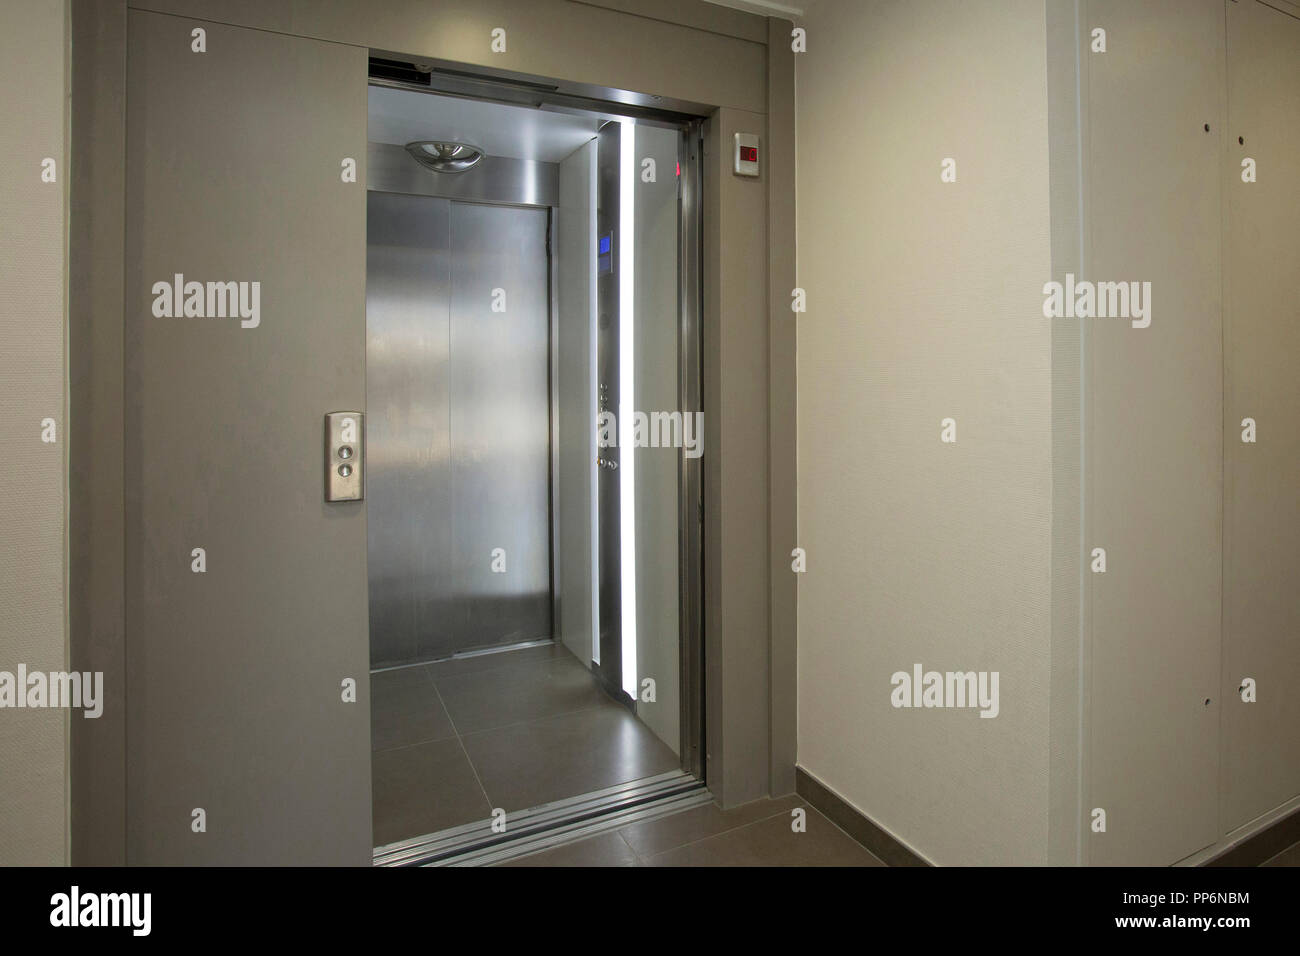 Elevator in a building Stock Photo